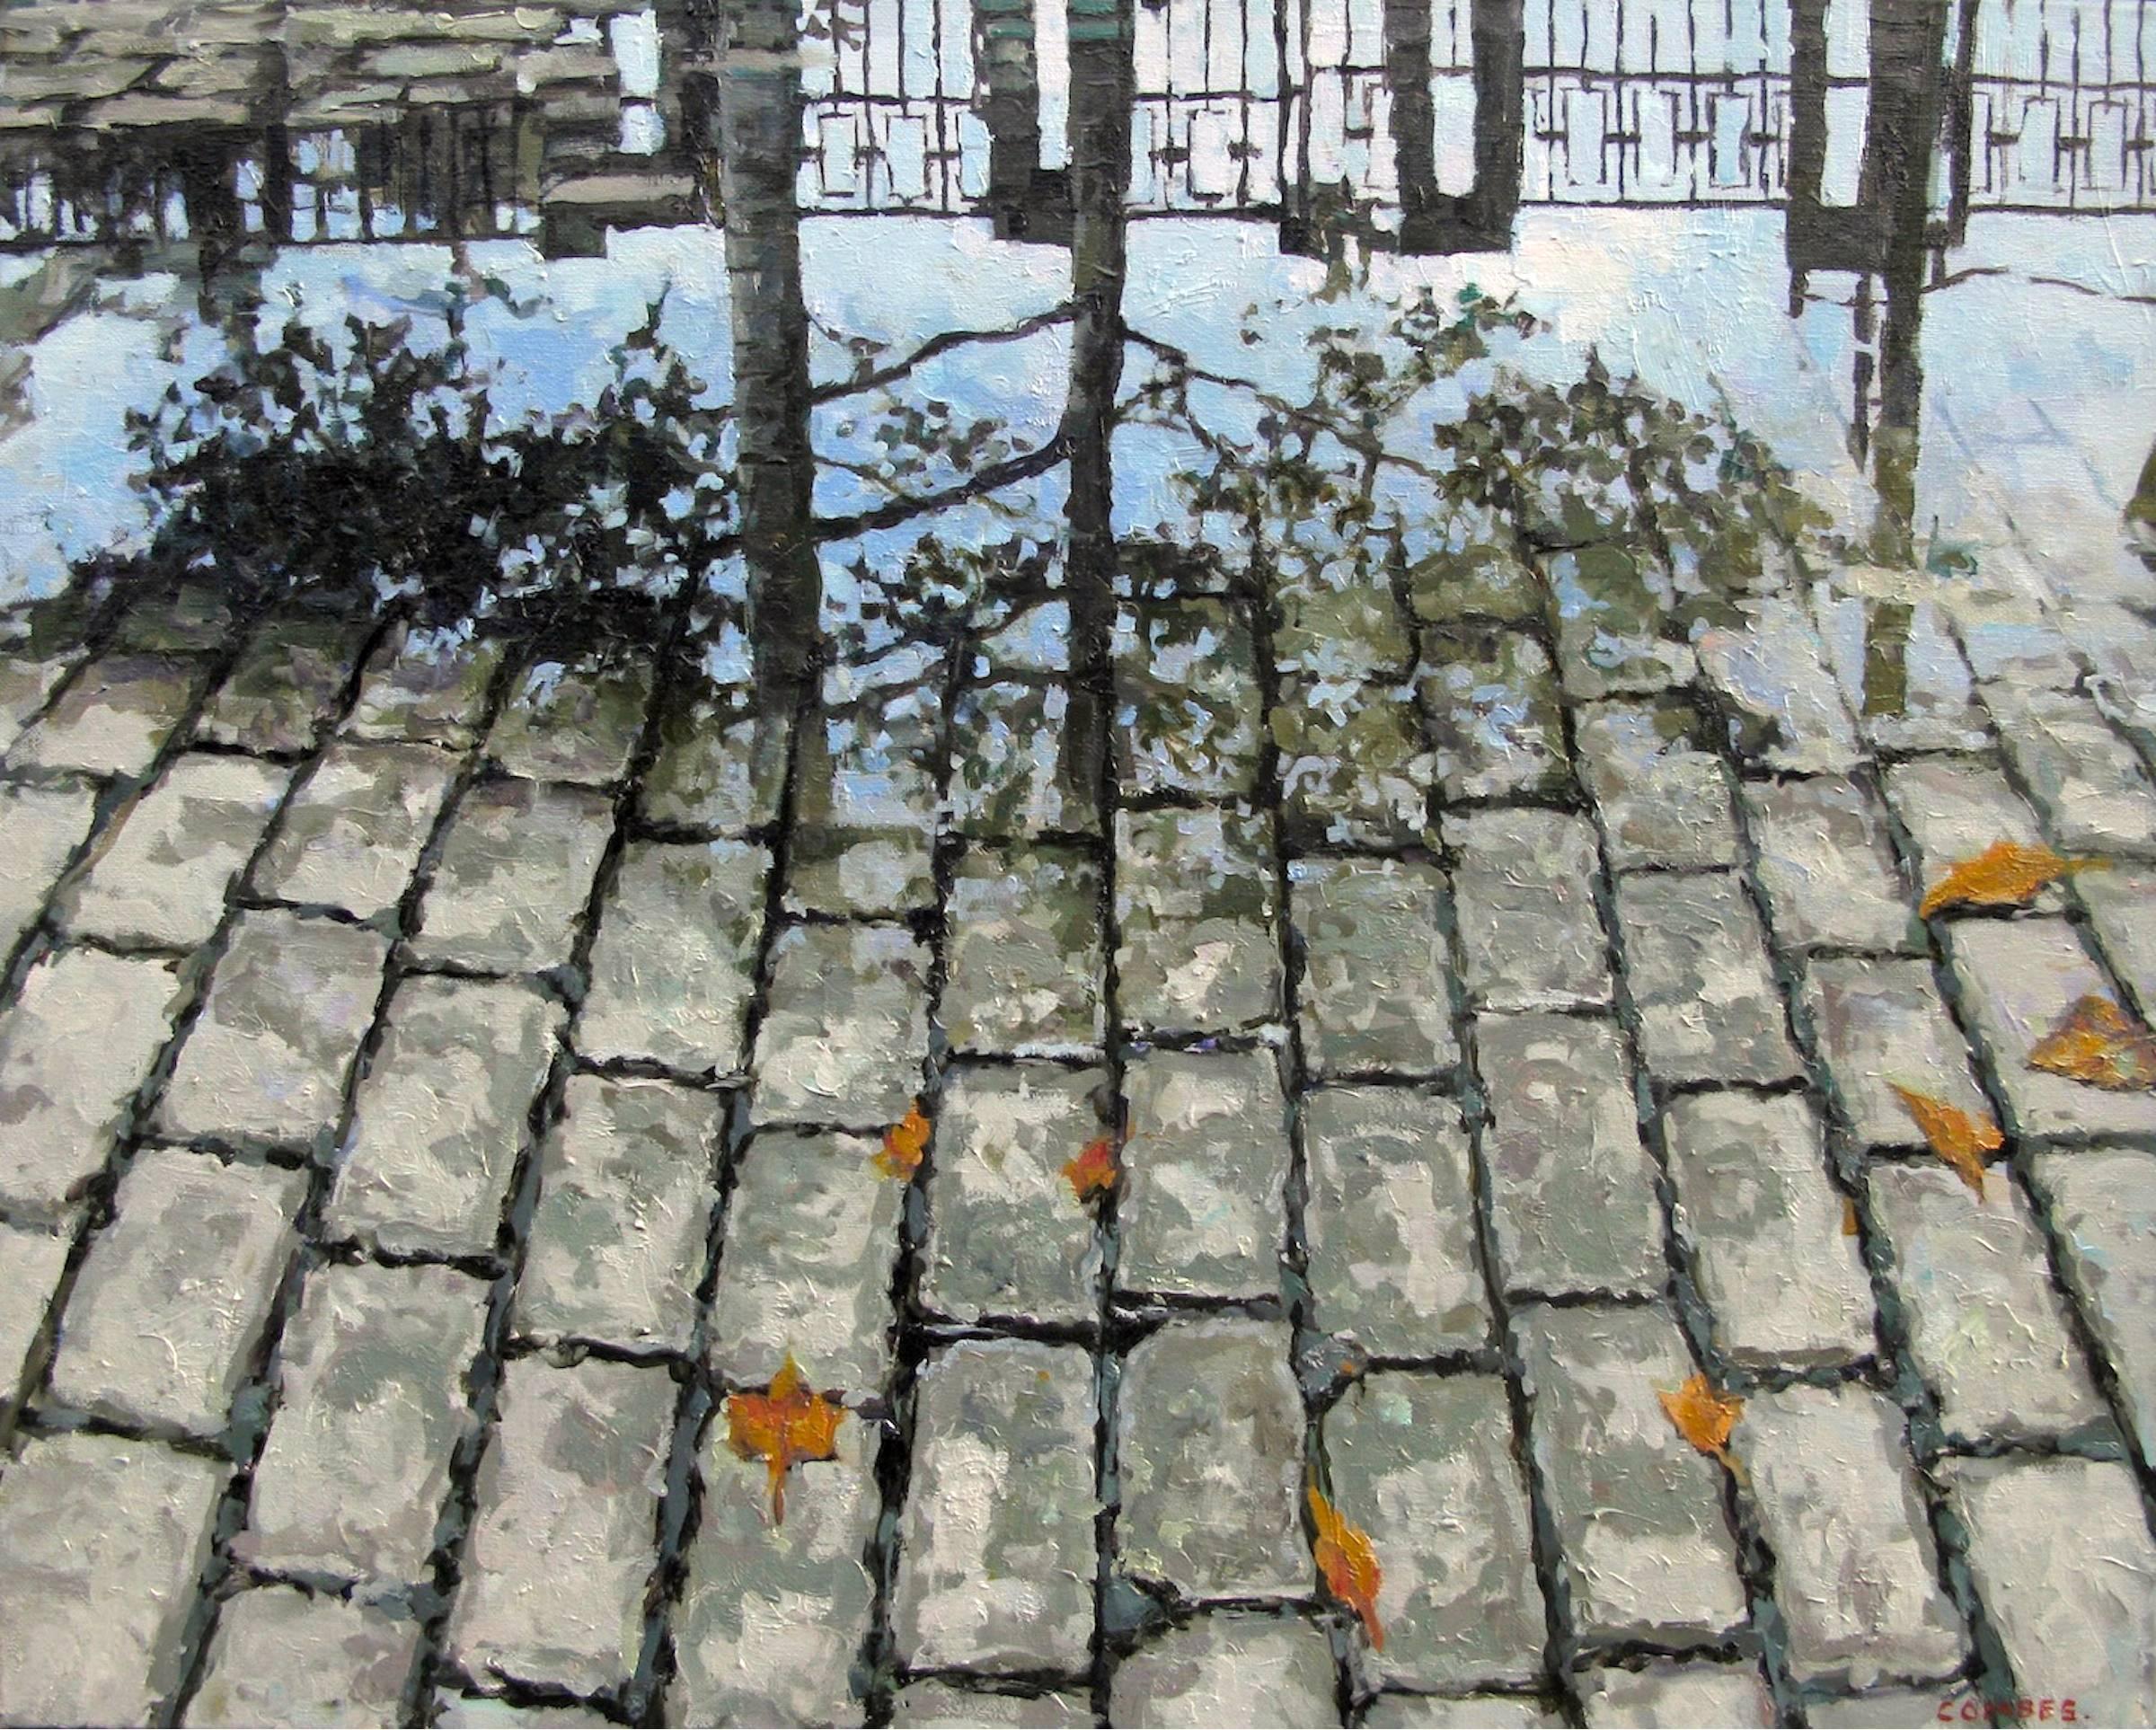 Richard Combes Landscape Painting - REFLECTED RAILING - Puddle on Cobblestone / Hyper-realism / Reflection in water